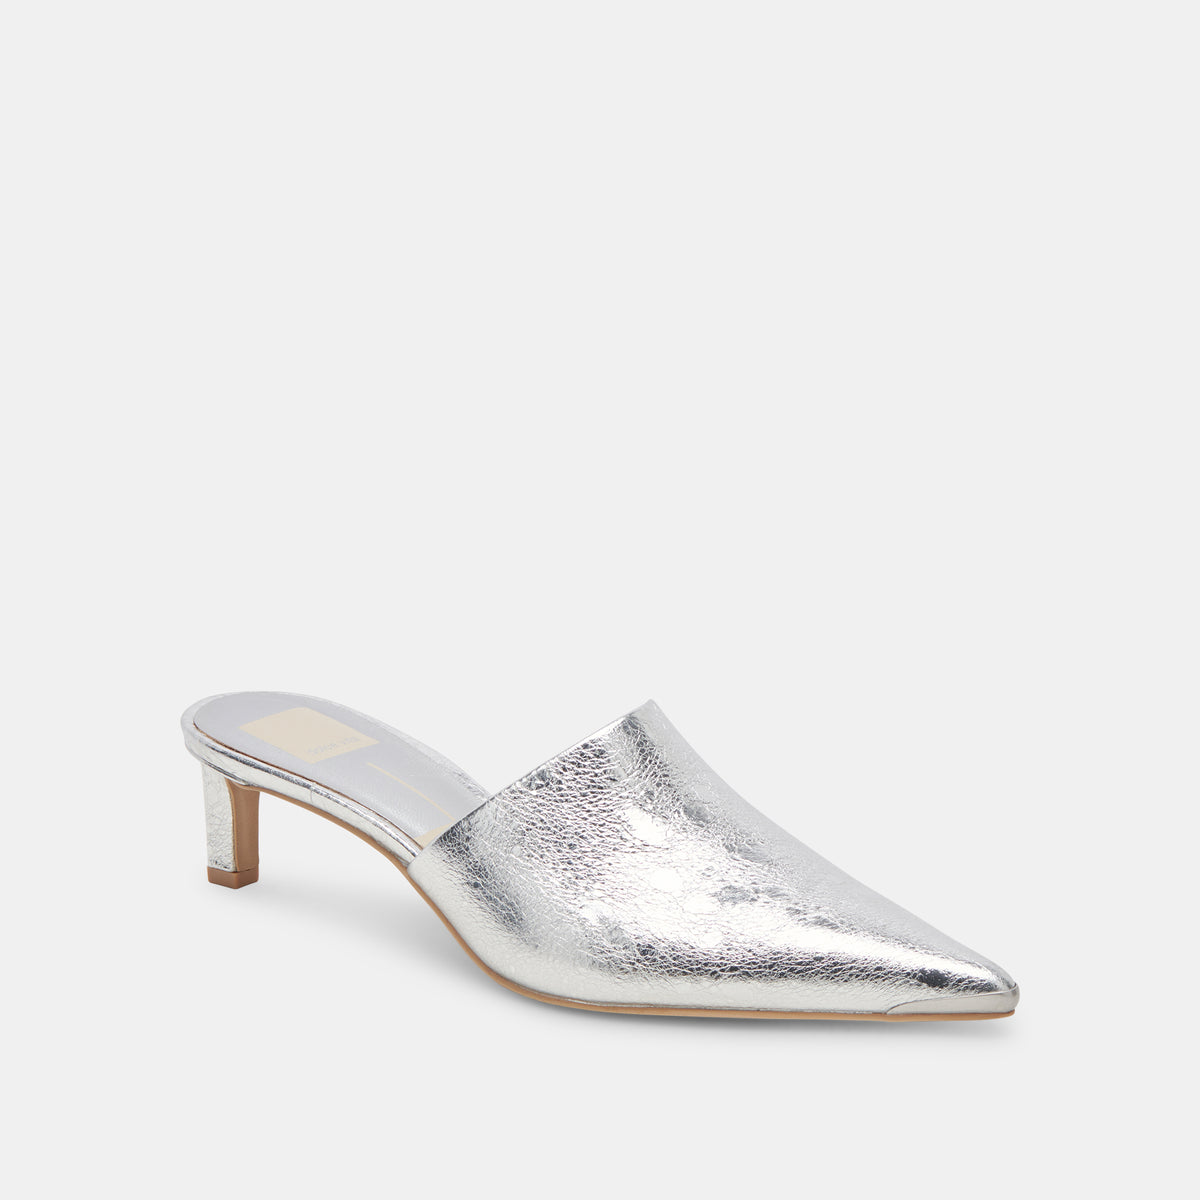 LEXY HEELS SILVER DISTRESSED LEATHER – Dolce Vita